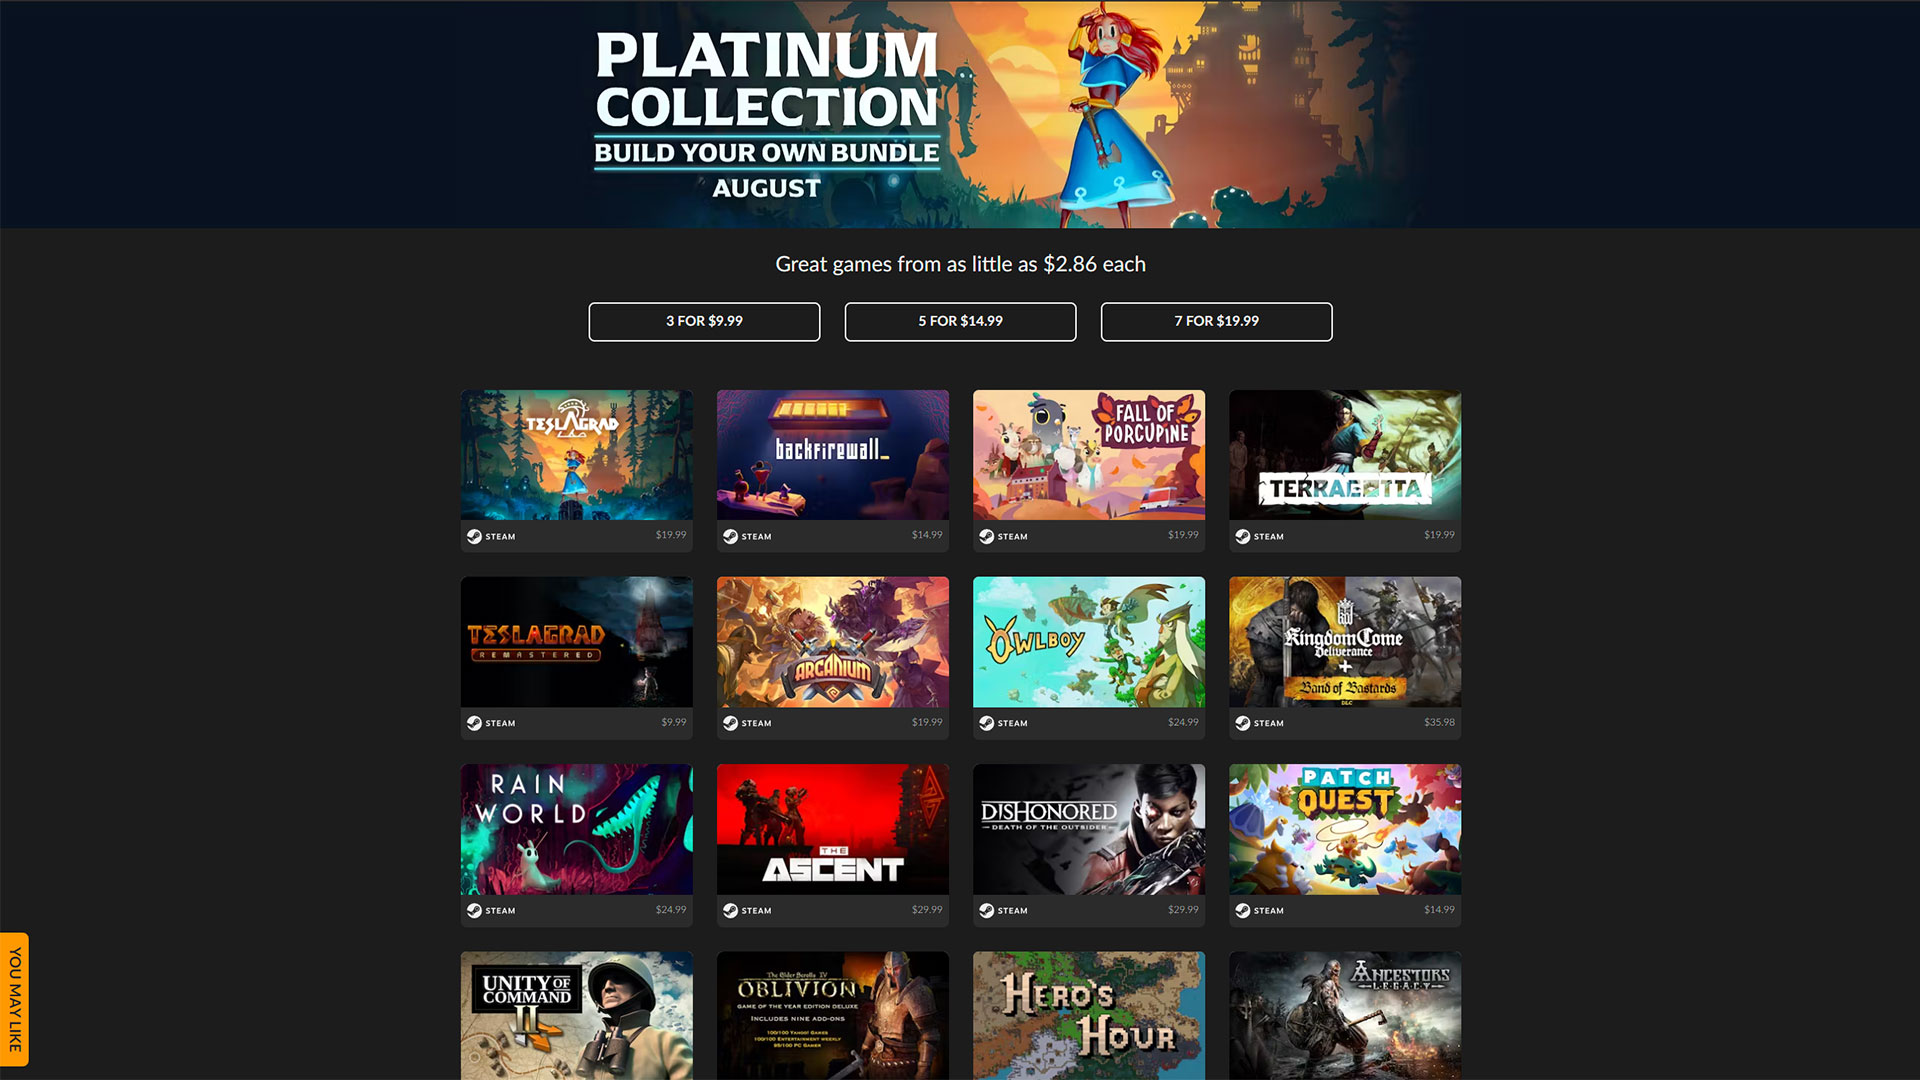 Fanatical's Platinum Collection Bundle lets you choose up to 7 games for just $19.99